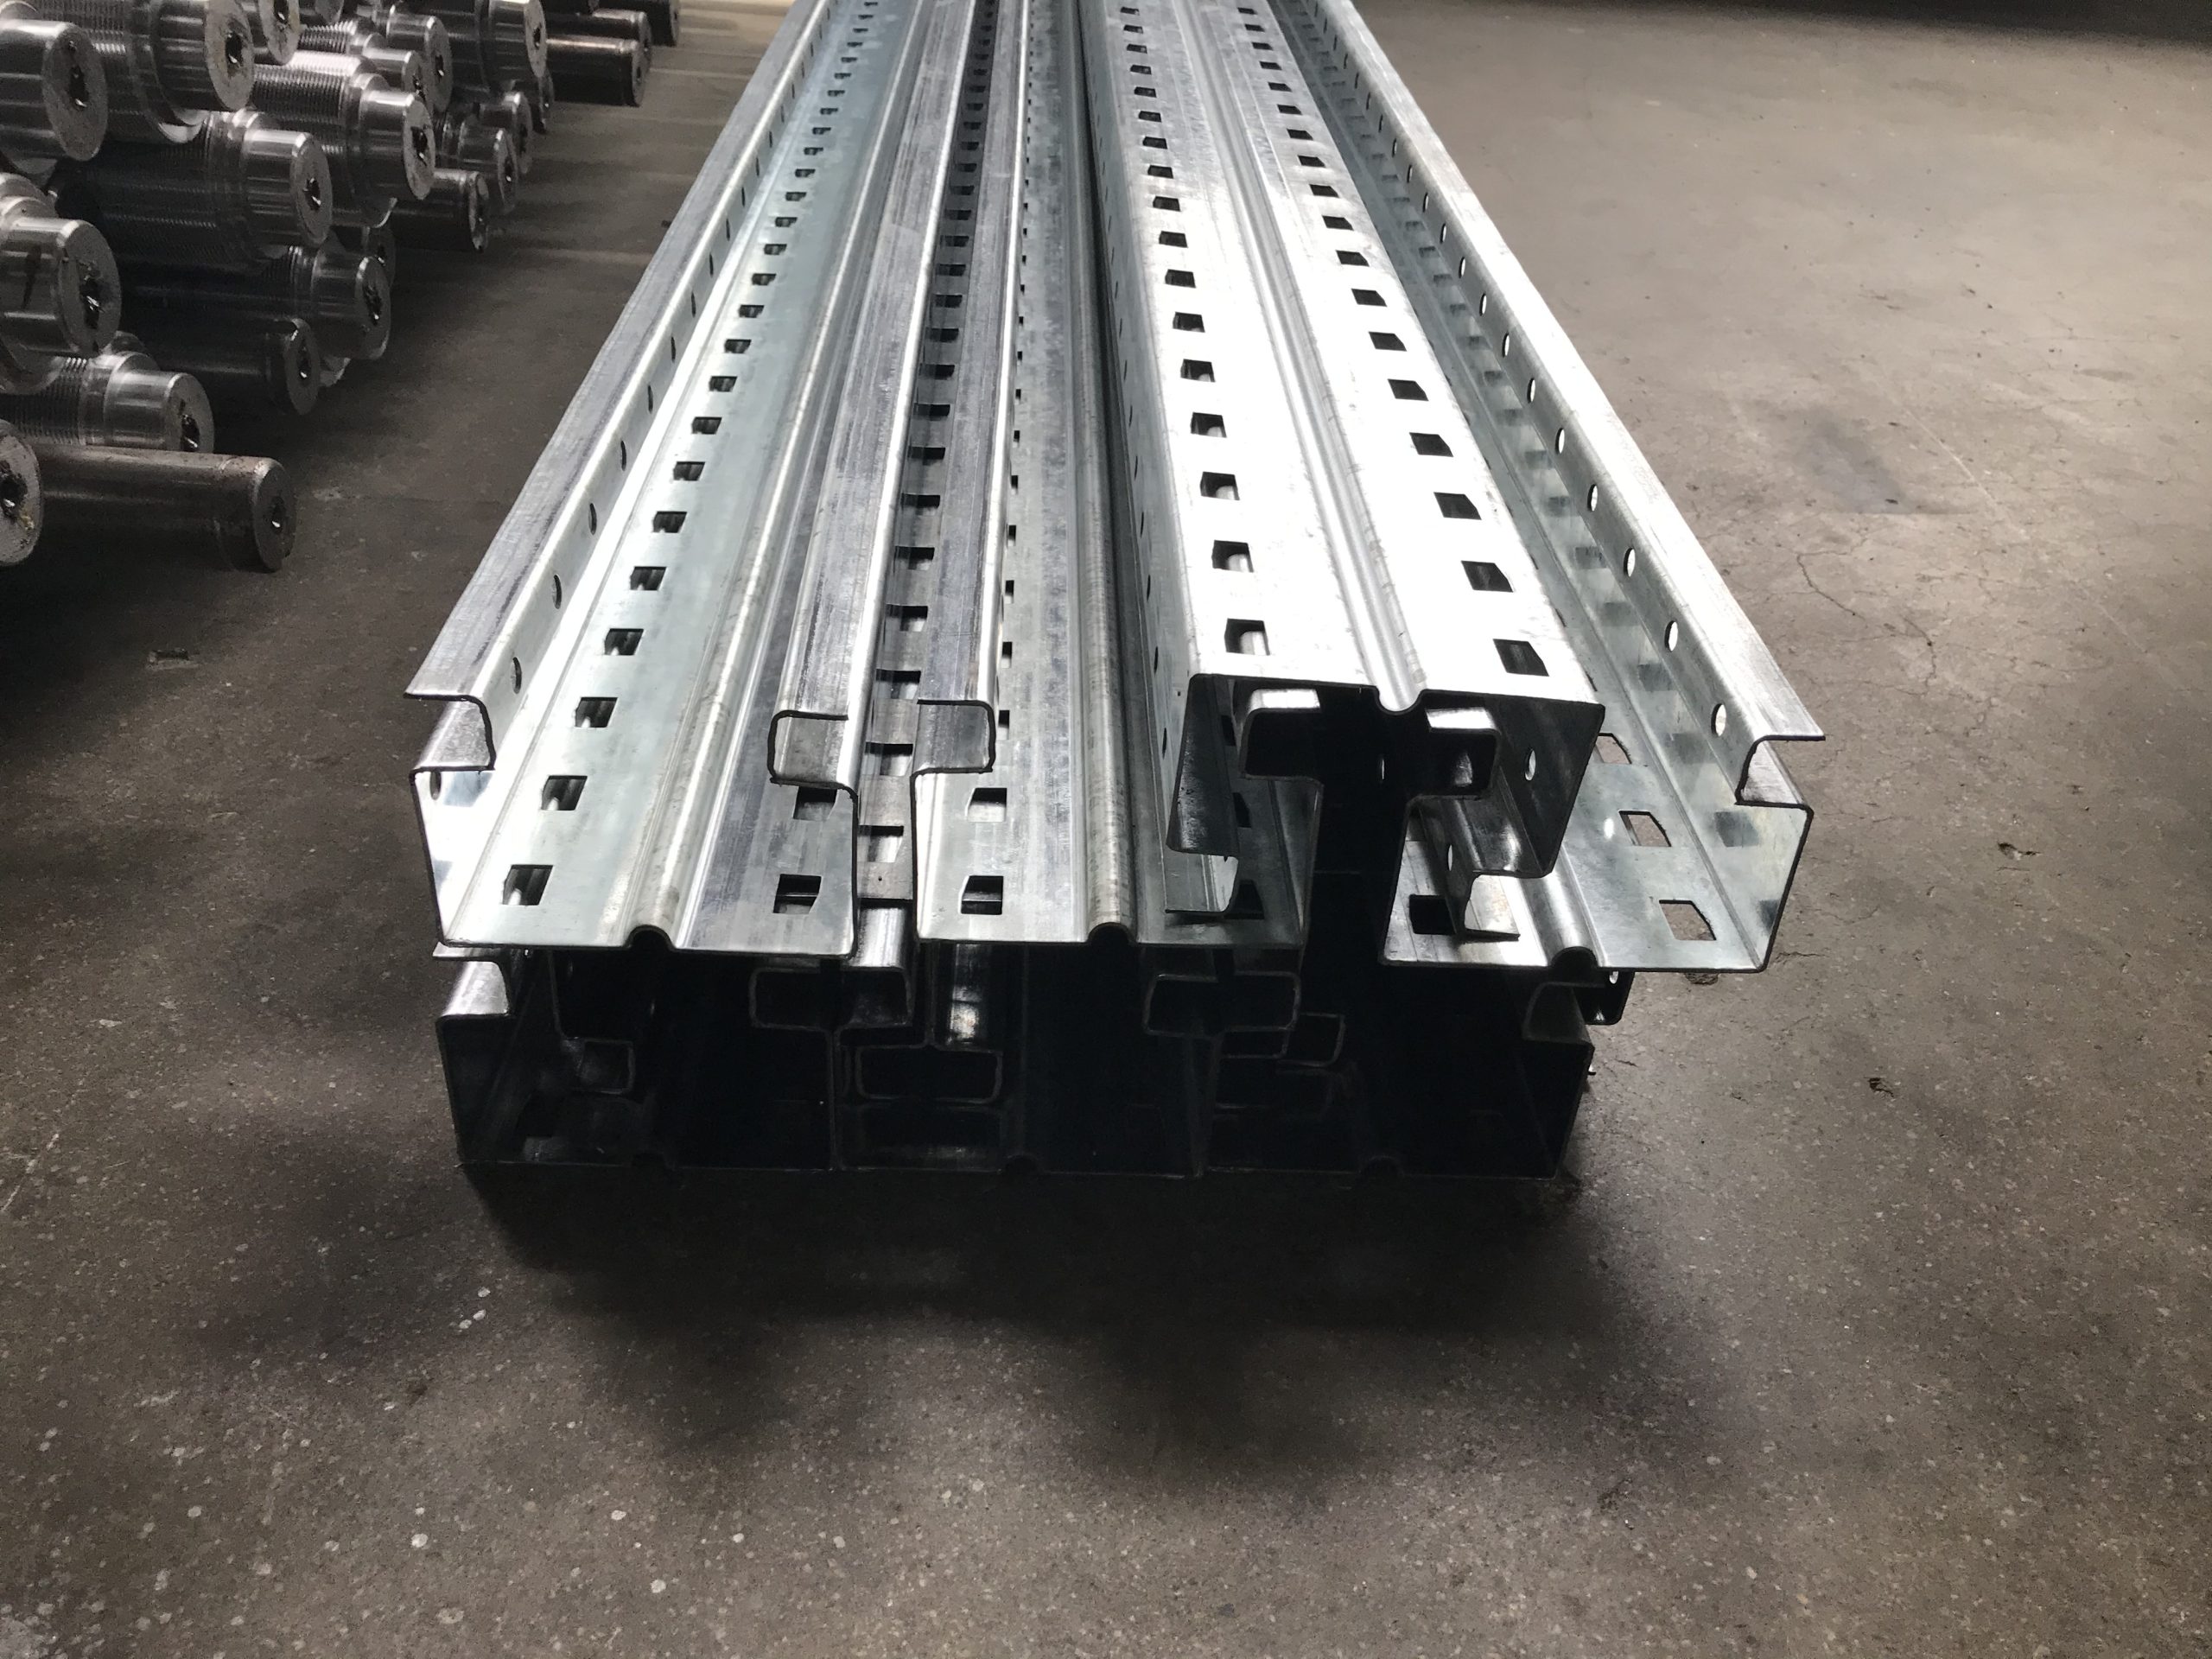 Heavy duty Upright Roll Forming Machine for warehouse shelf